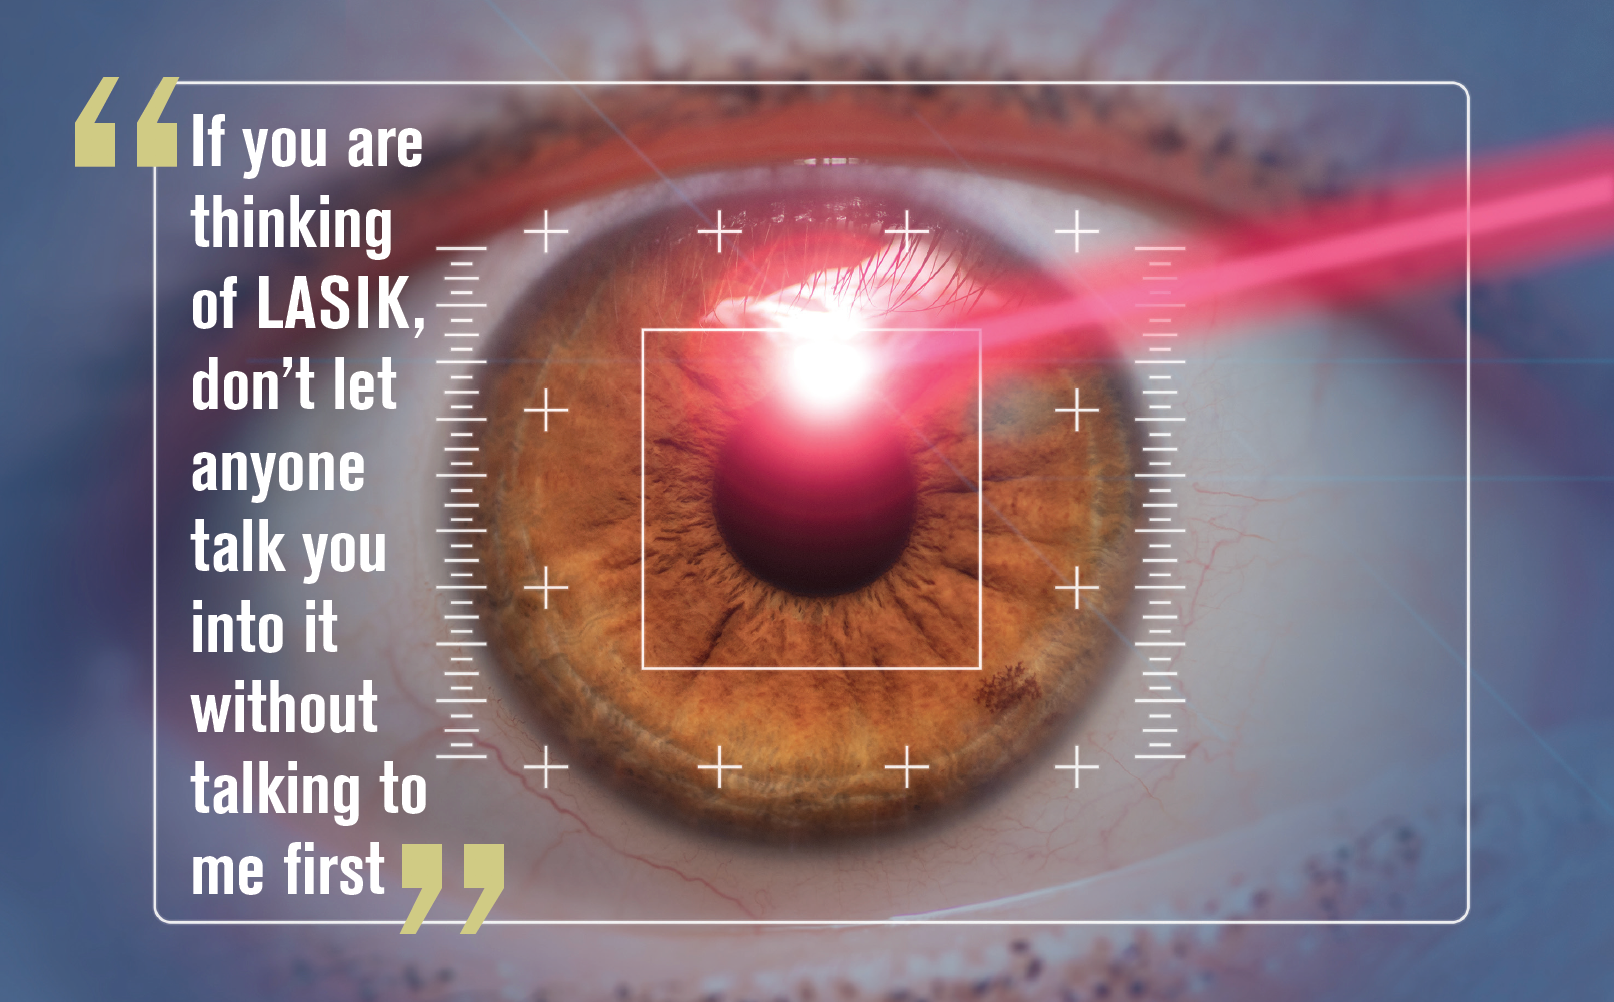 Which patients are poor laser vision correction candidates?